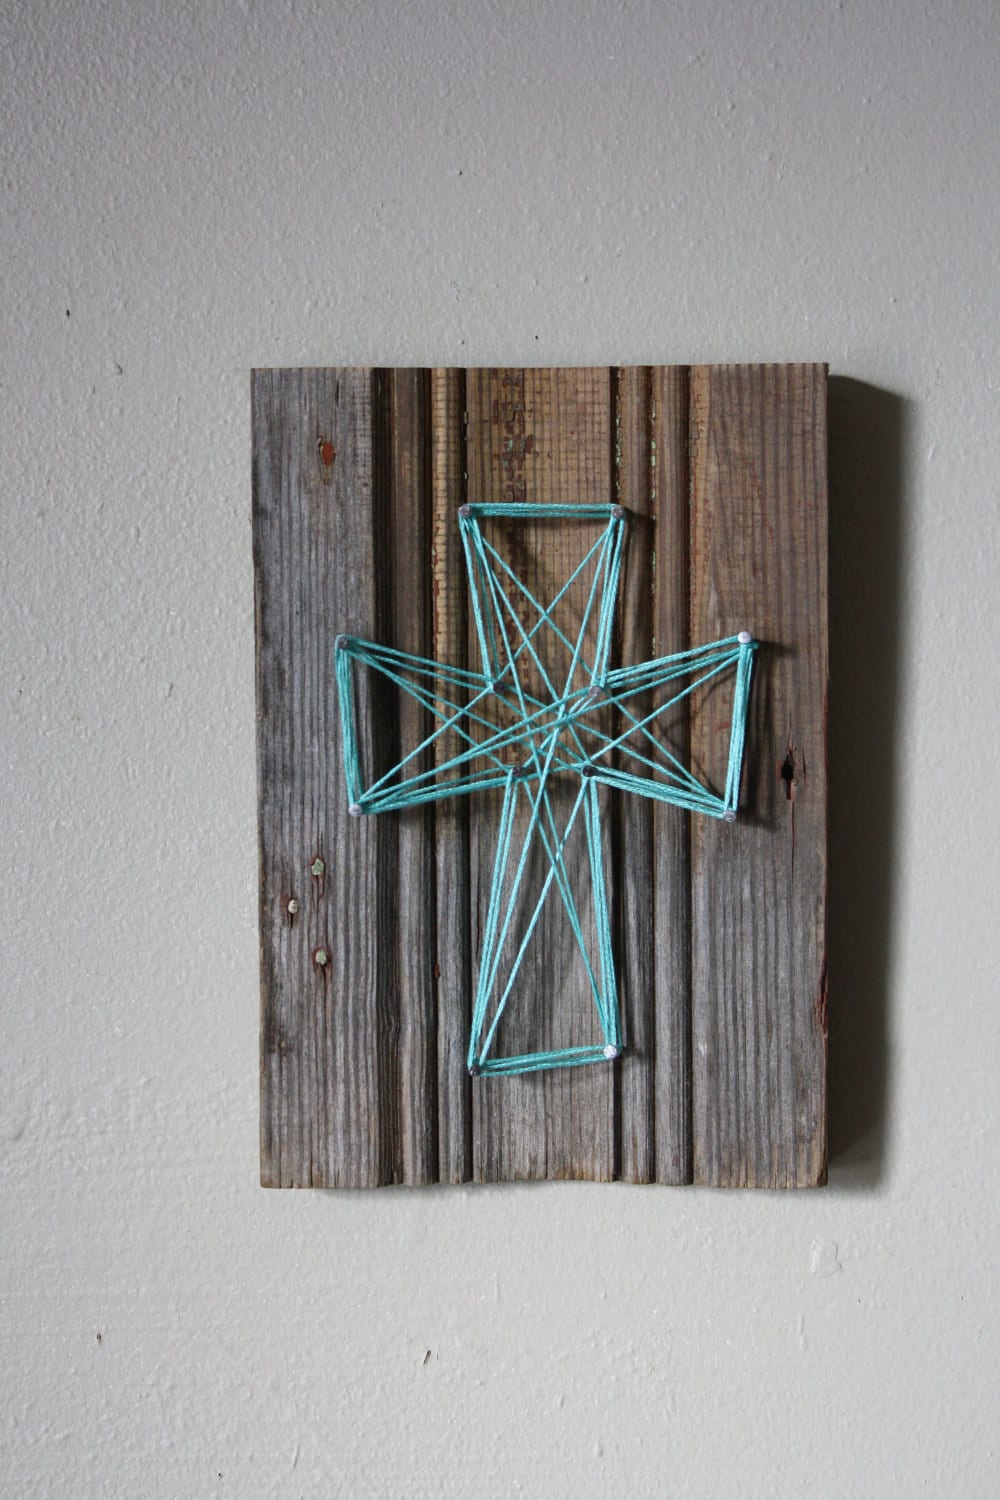 Reclaimed Wood Trim with String Art Cross Wall Decor